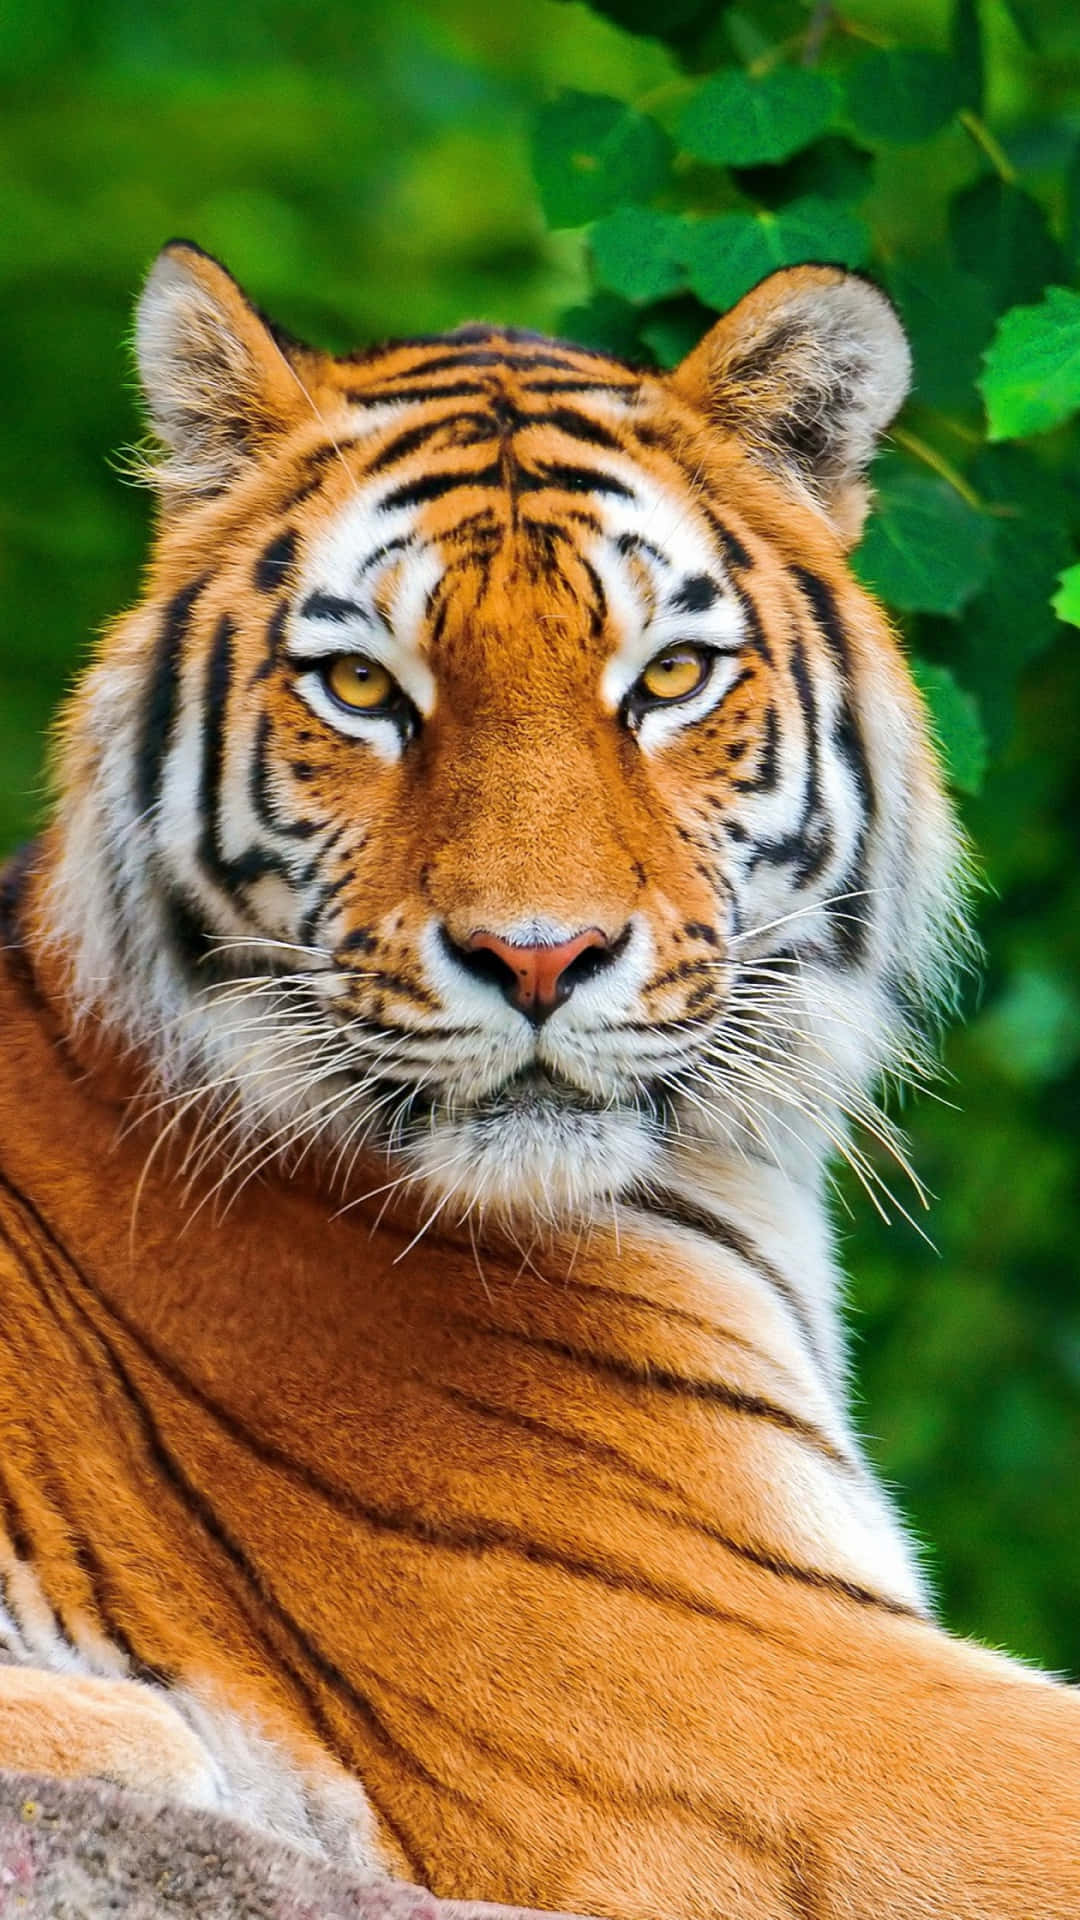 A Tiger Is Sitting On A Rock In The Forest Wallpaper